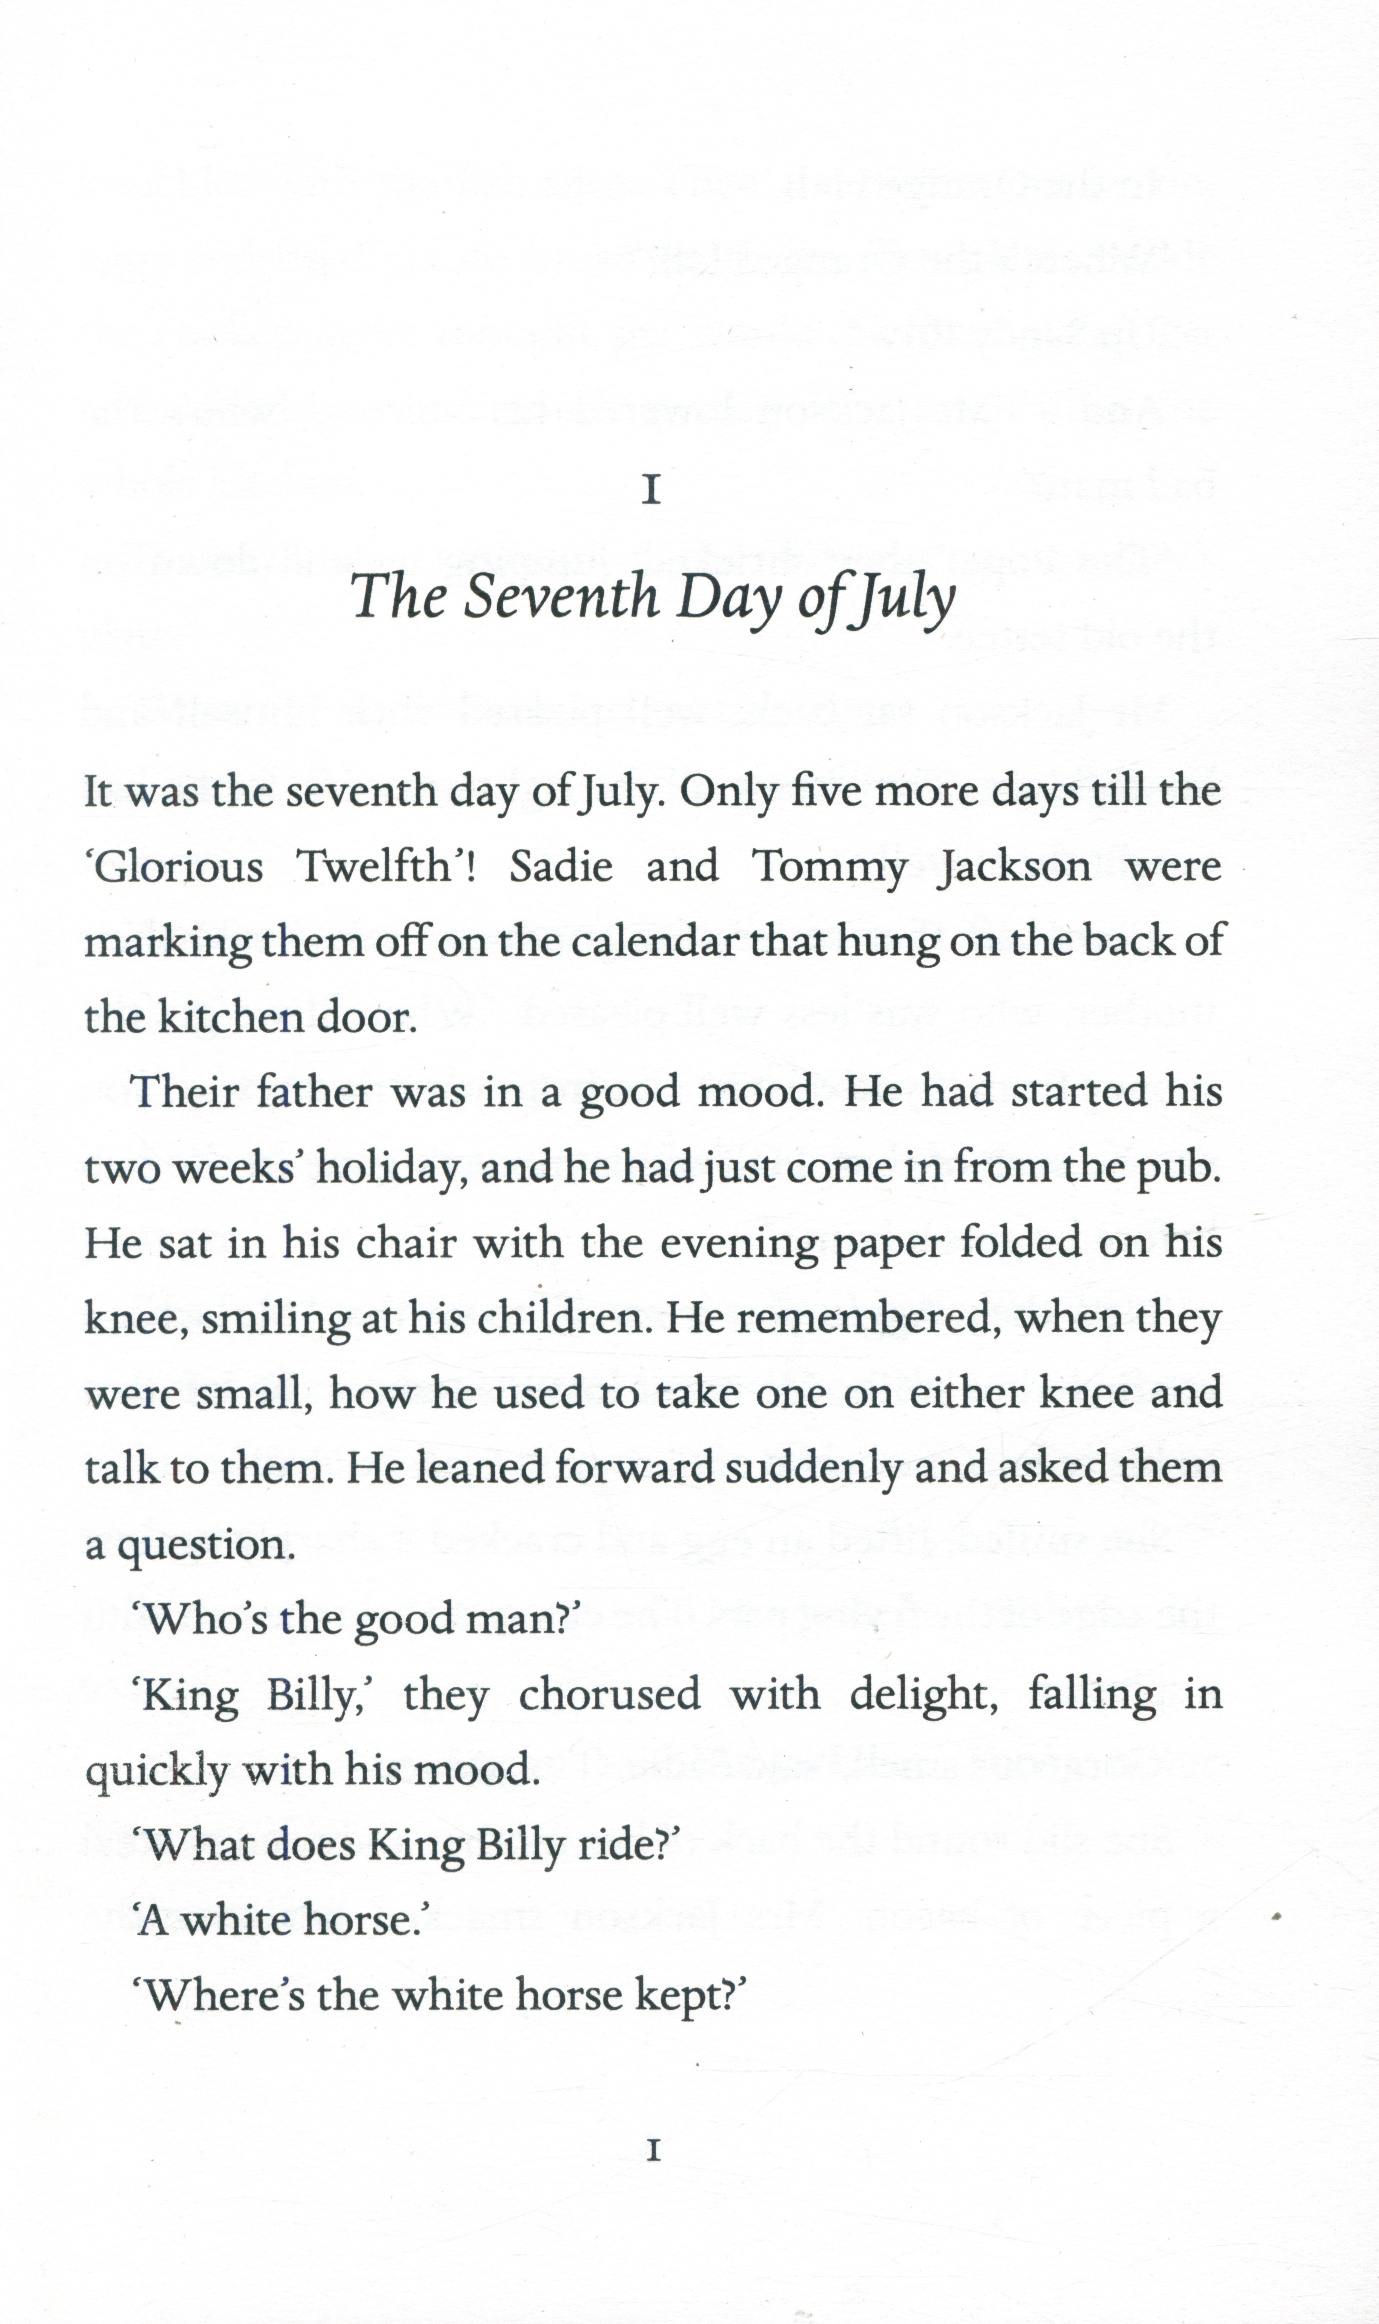 Twelfth Day of July P/B by Joan Lingard